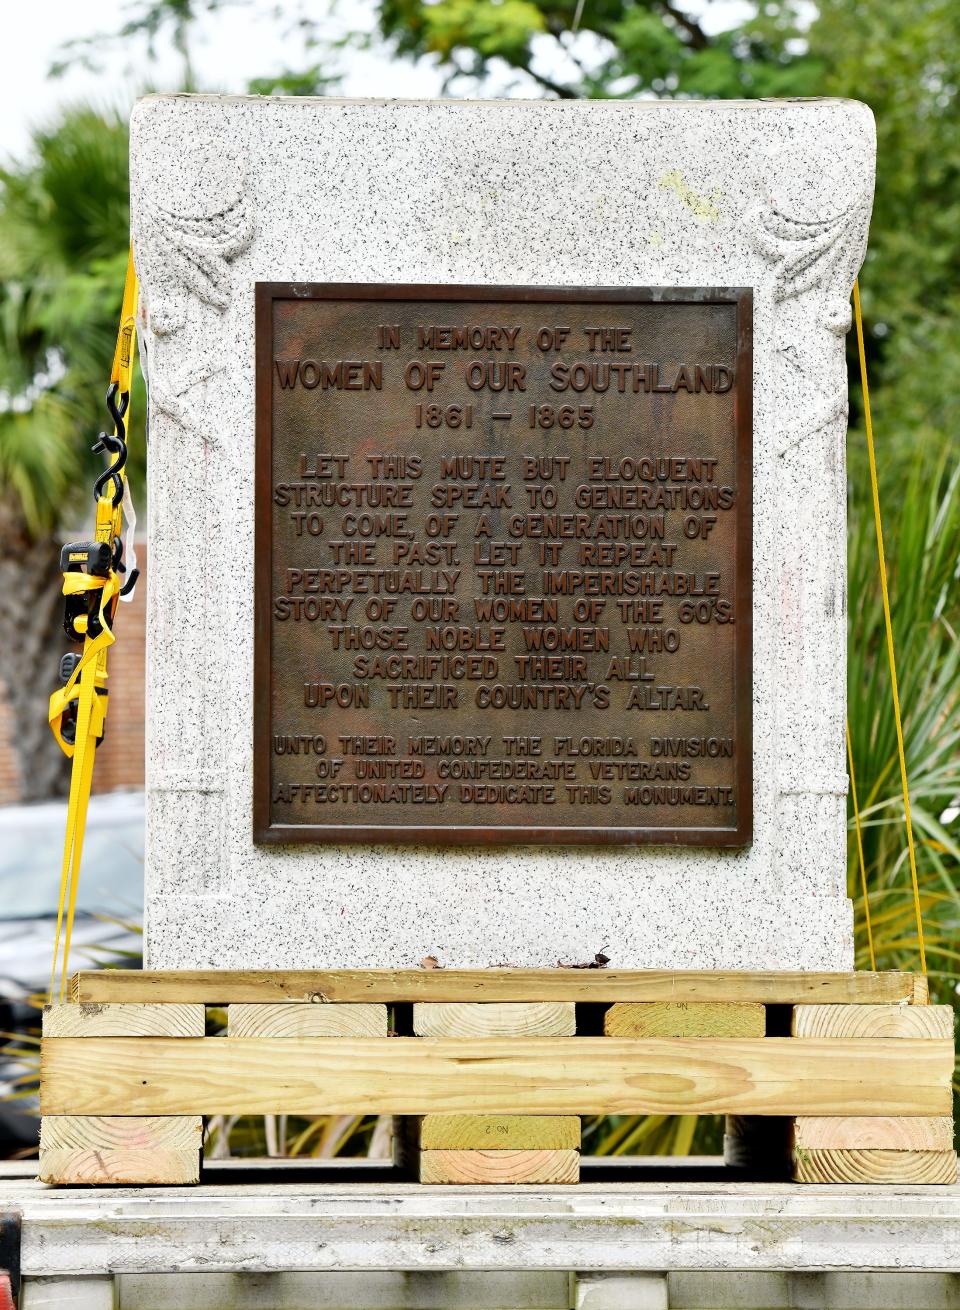 The pedestal and commemorative plaque that held the bronze statue of a woman reading to two children is strapped to the bed of a flatbed truck after being removed from the "Women of the Southland" monument in Springfield Park on Wednesday.